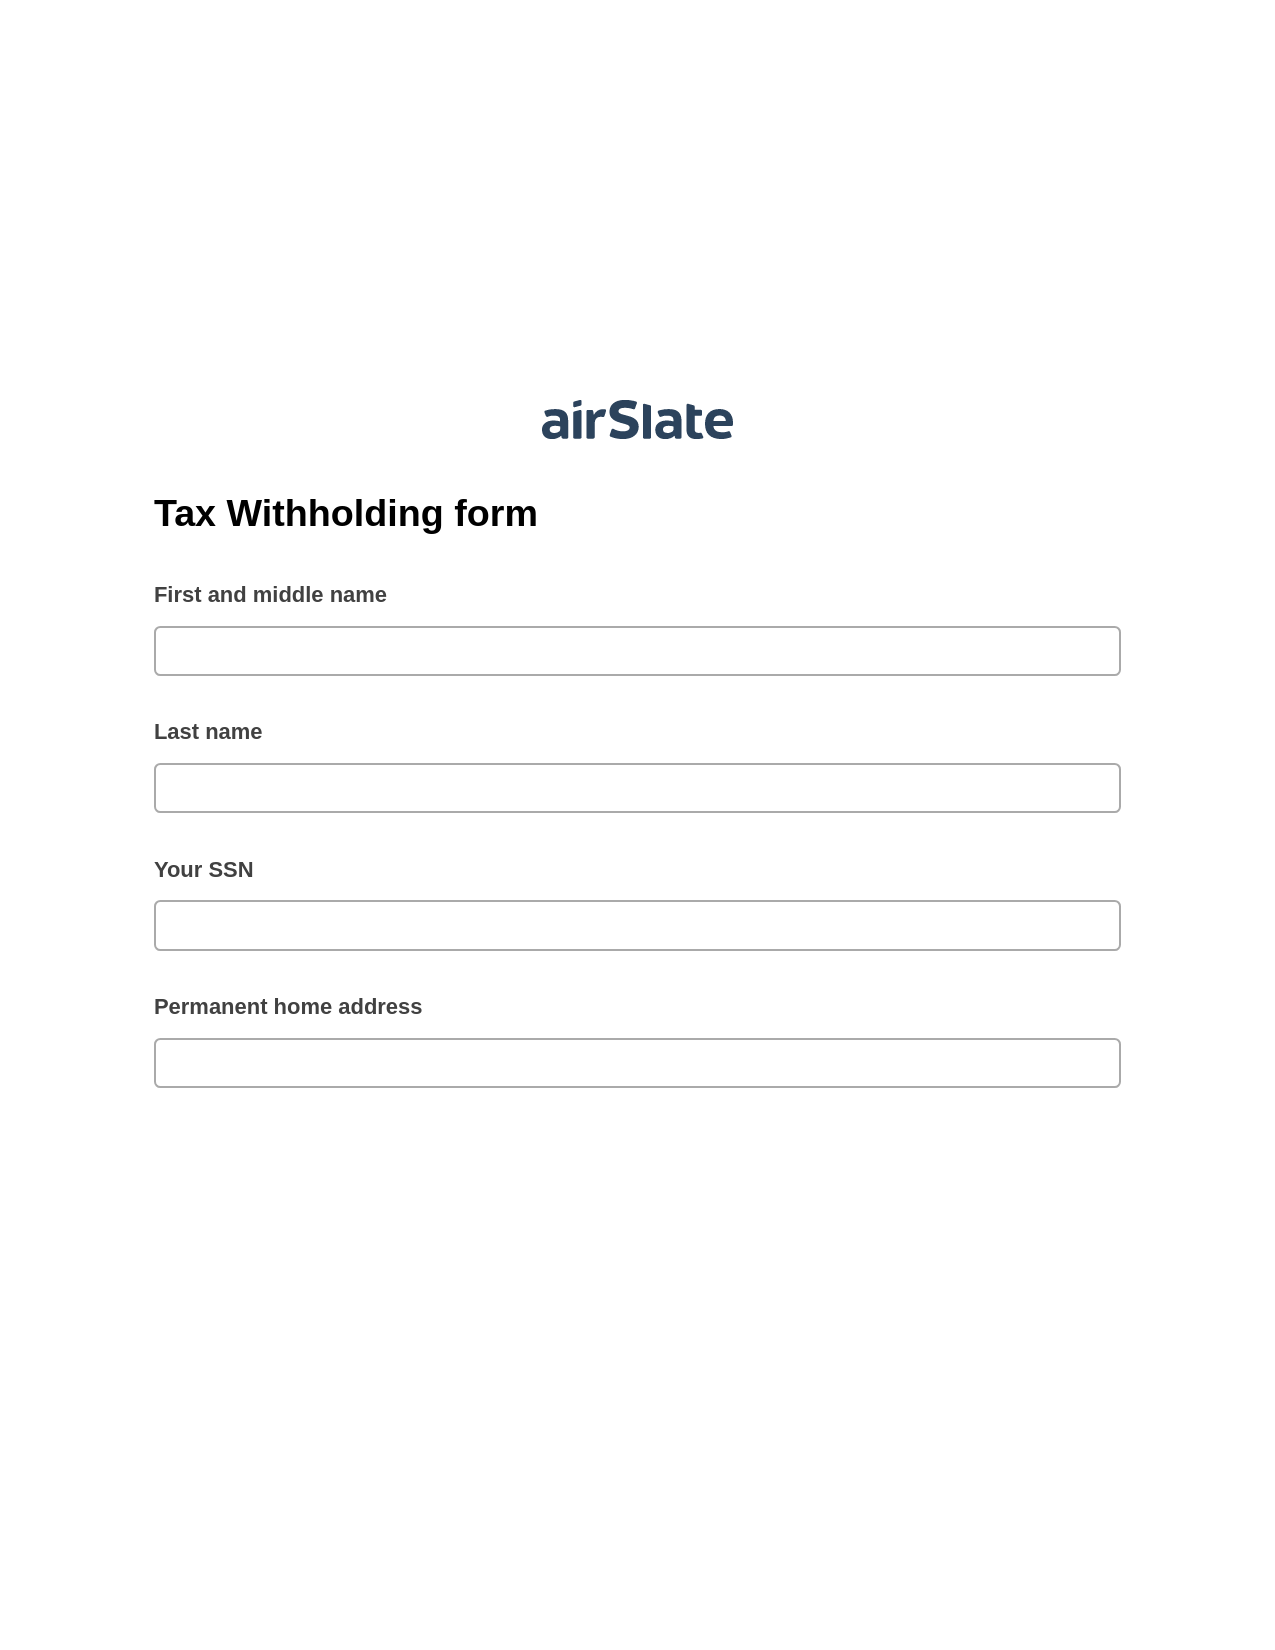 Tax Withholding form Pre-fill Slate from MS Dynamics 365 Records Bot, SendGrid Send Campaign Bot, Text Message Notification Postfinish Bot